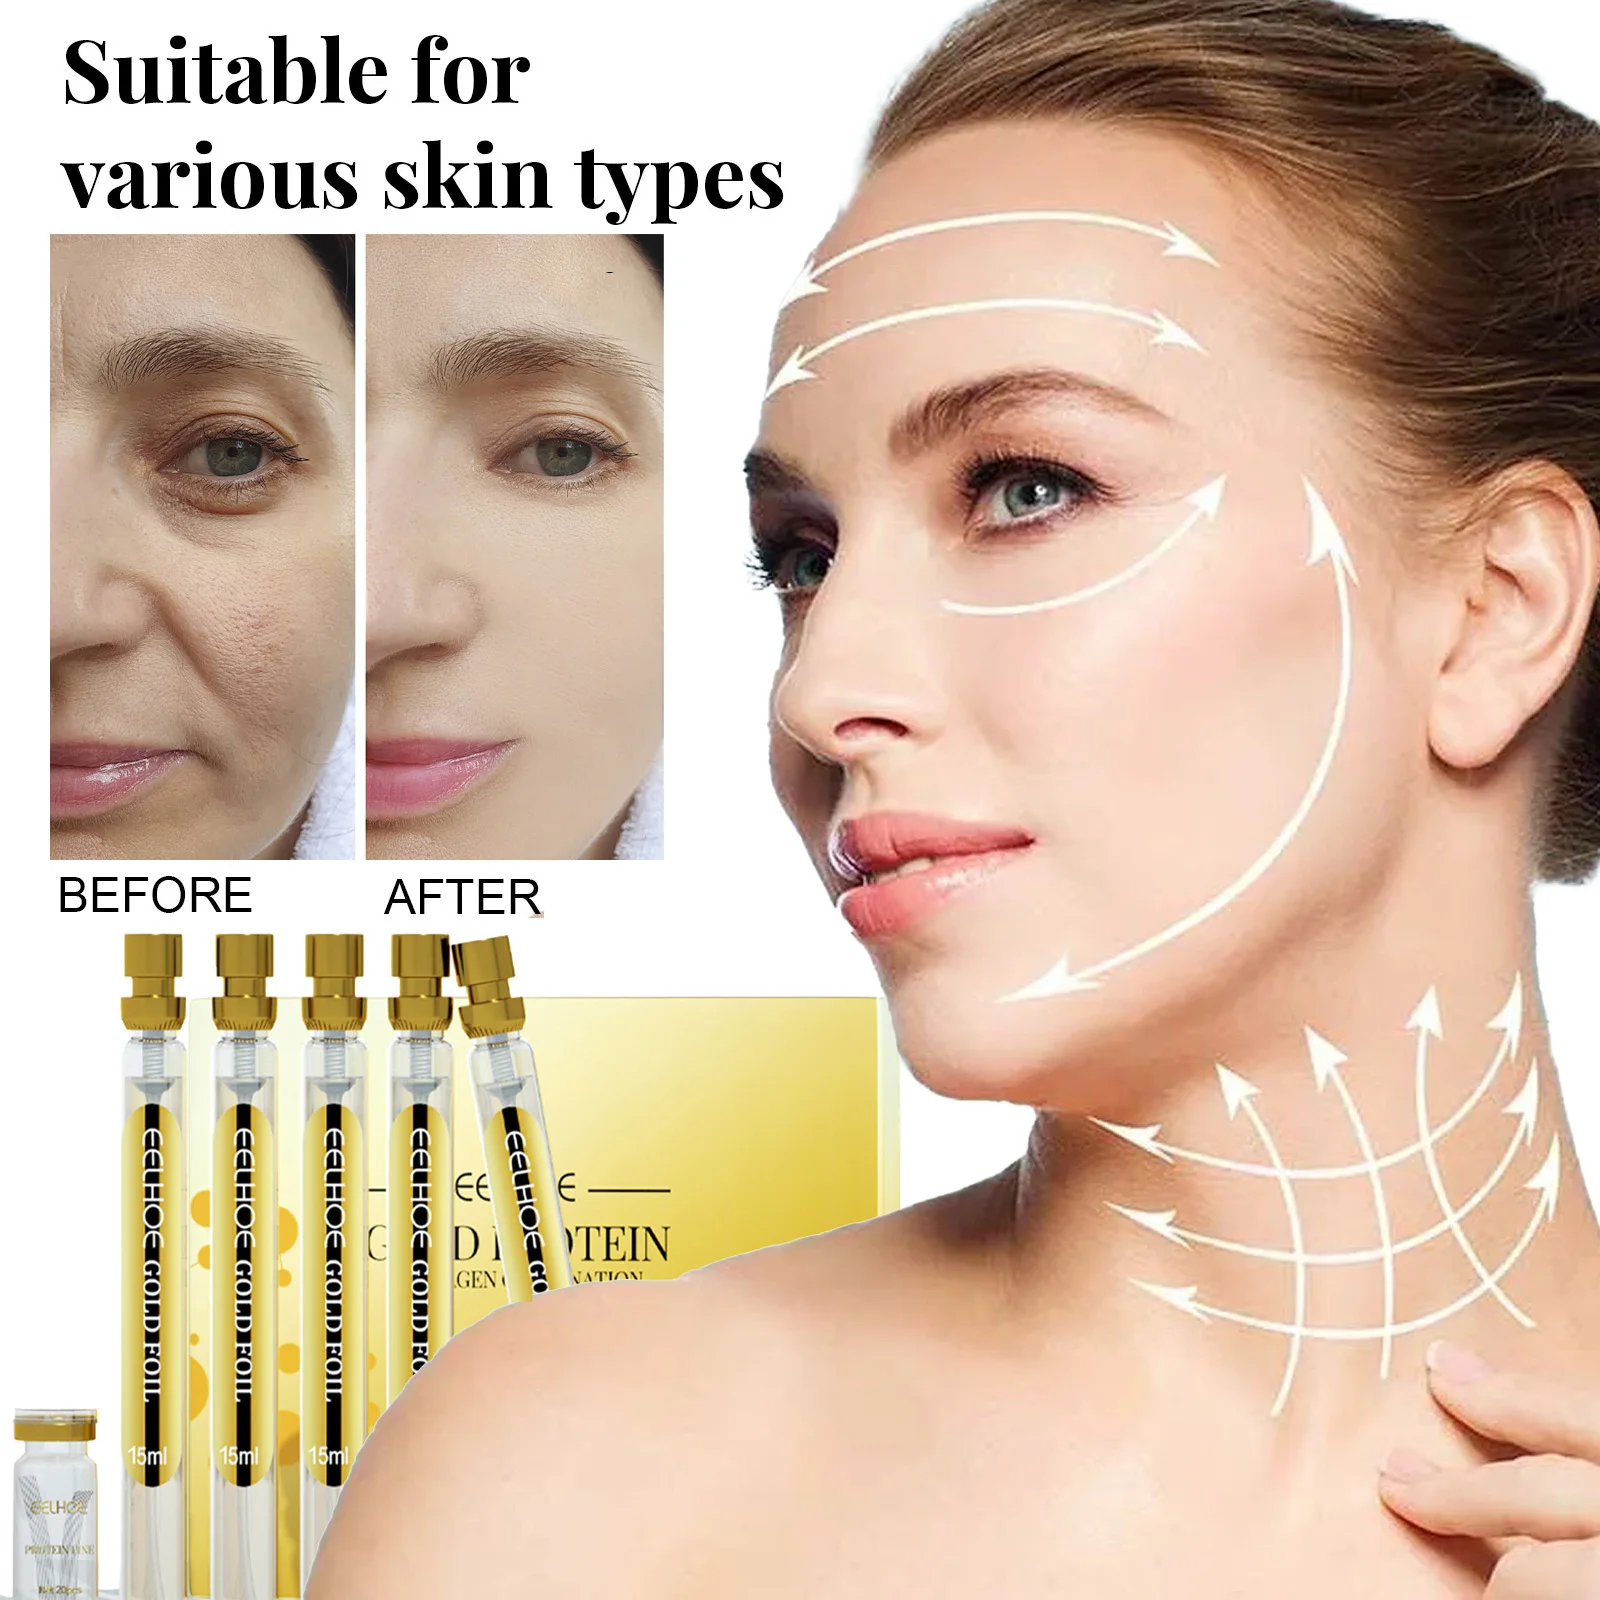 

Anti Aging Hyaluronic Acid 24K Gold Active Collagen Facial Essence Protein Thread Serum Skin Care Tool For Firming Moisturizing